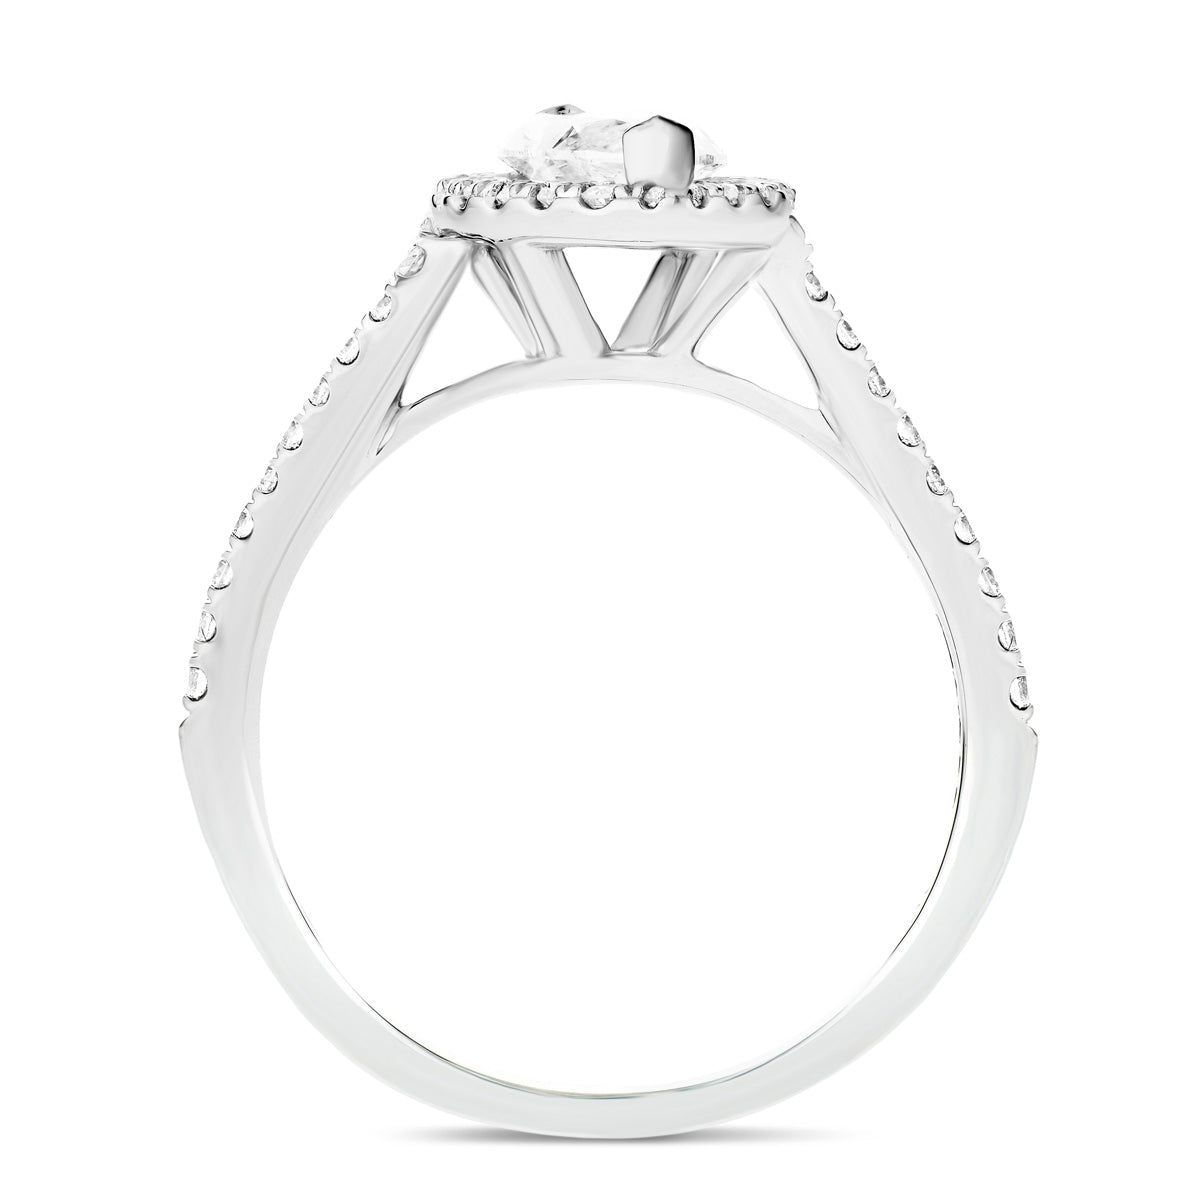 Certified Twist Marquise Diamond Halo Engagement Ring 1.10ct G/SI in 18k White Gold - All Diamond